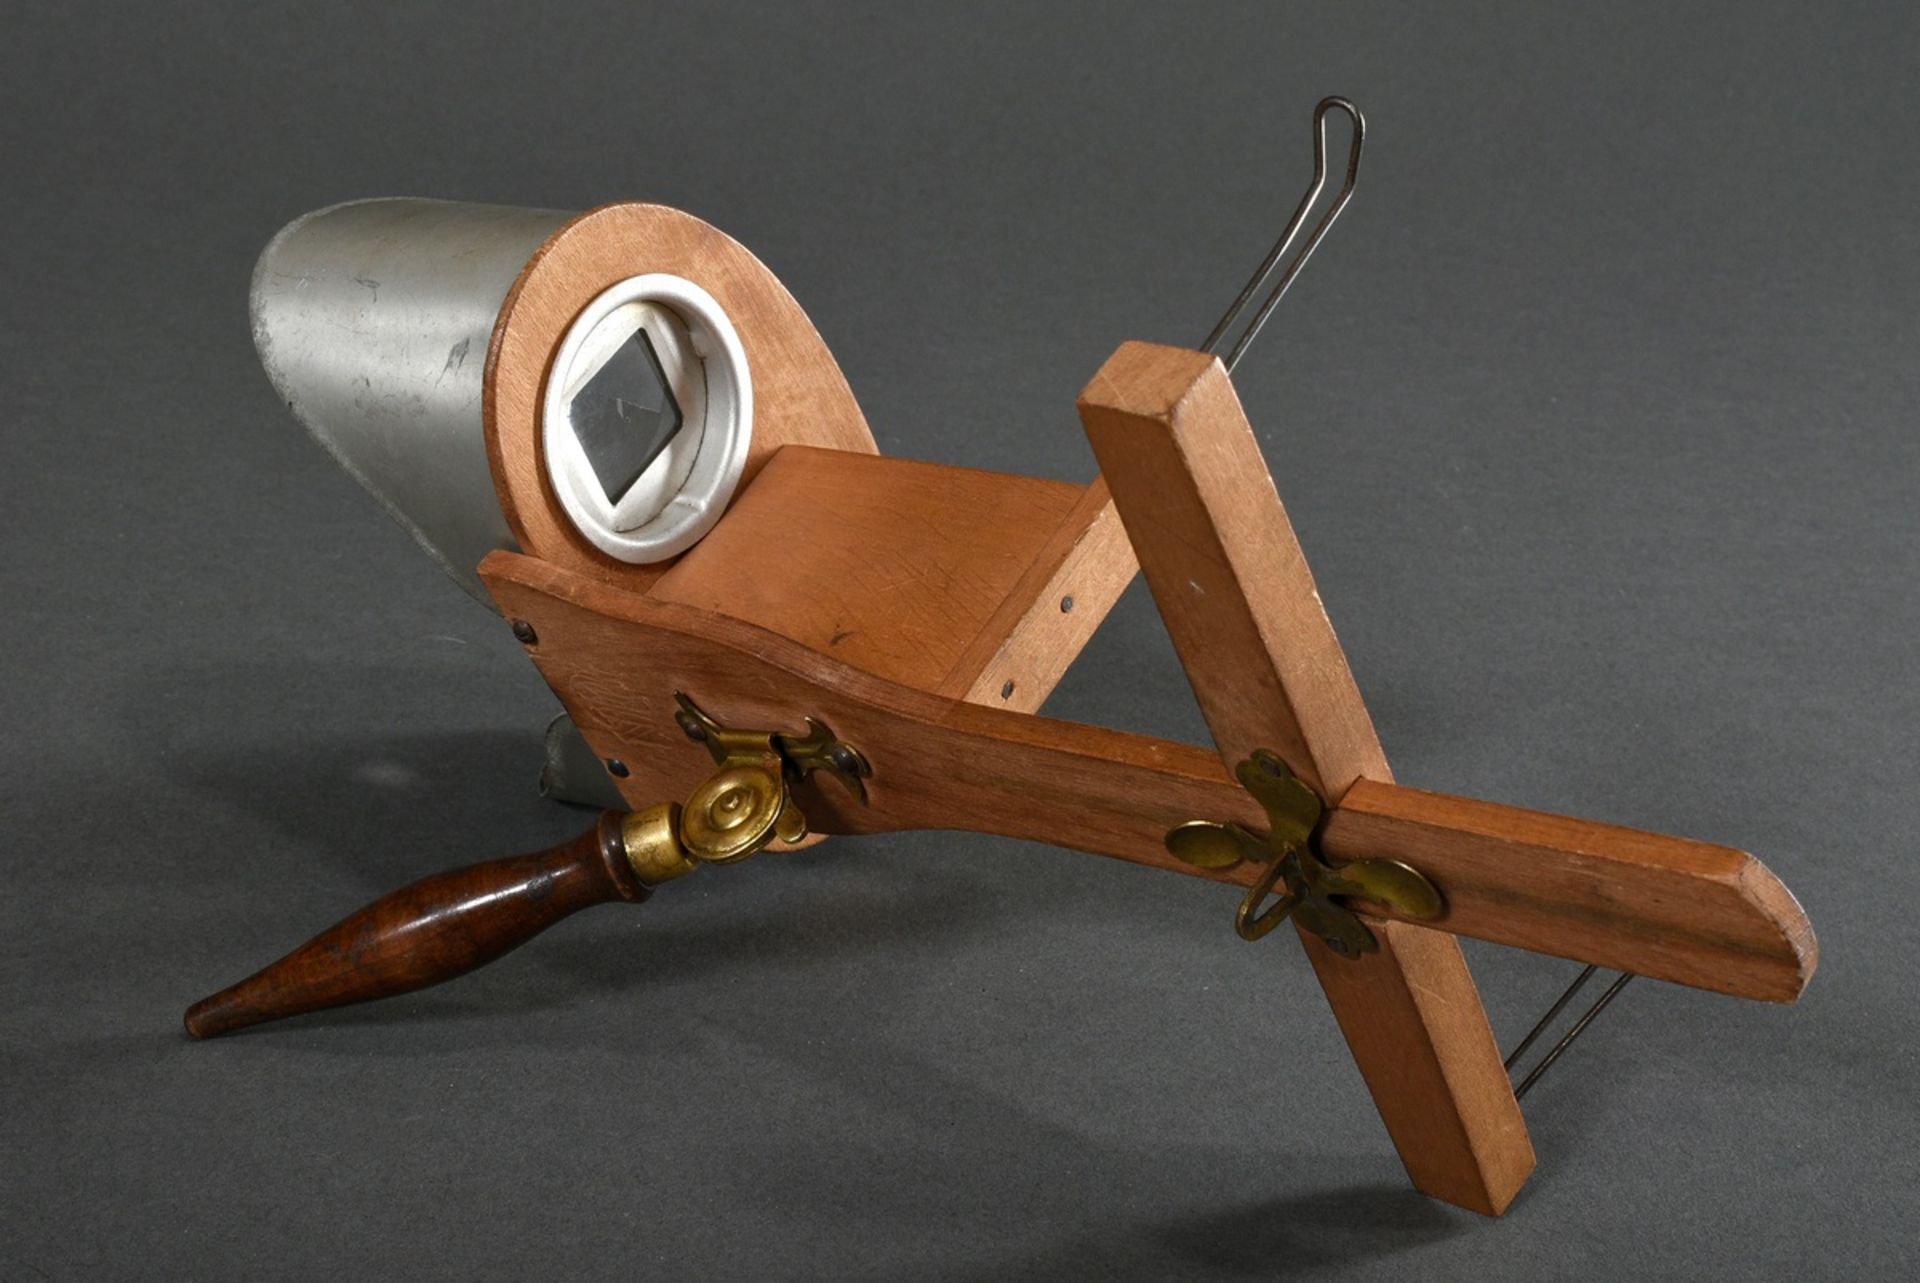 Hand-held stereo viewer with numerous stereo photos, German circa 1900, viewer with retractable han - Image 2 of 5